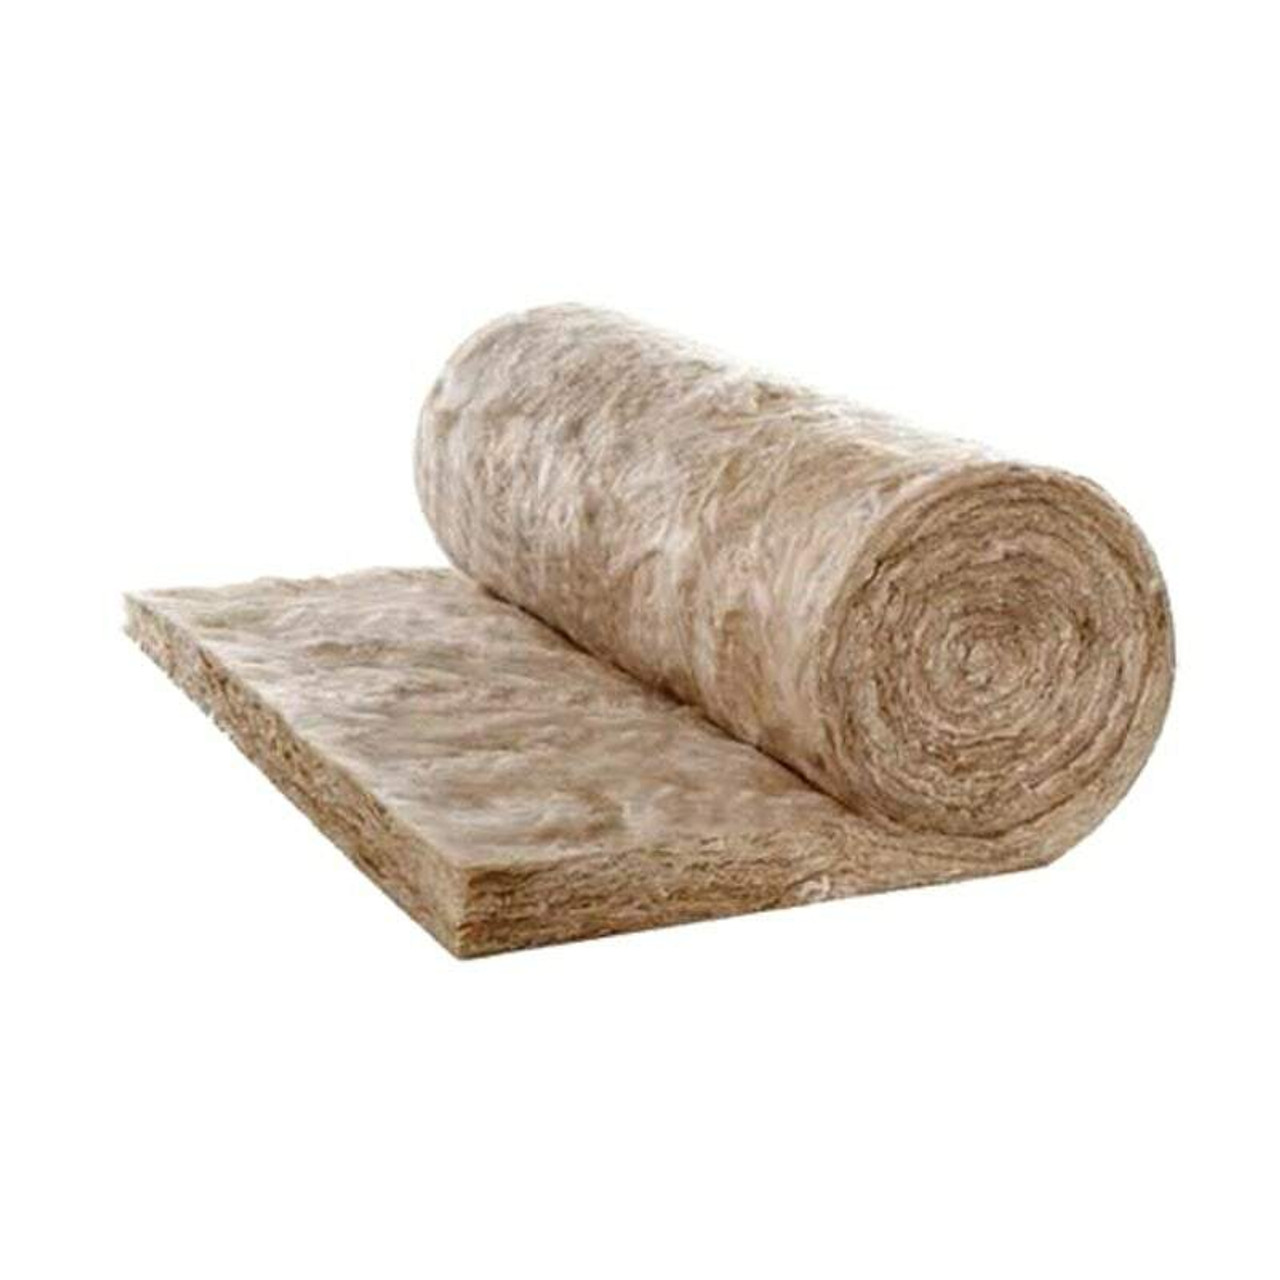 50mm - Knauf Acoustic Roll Earthwool Insulation APR - 16.2m2 Pack 10010064-16.2m2 KNF-50389